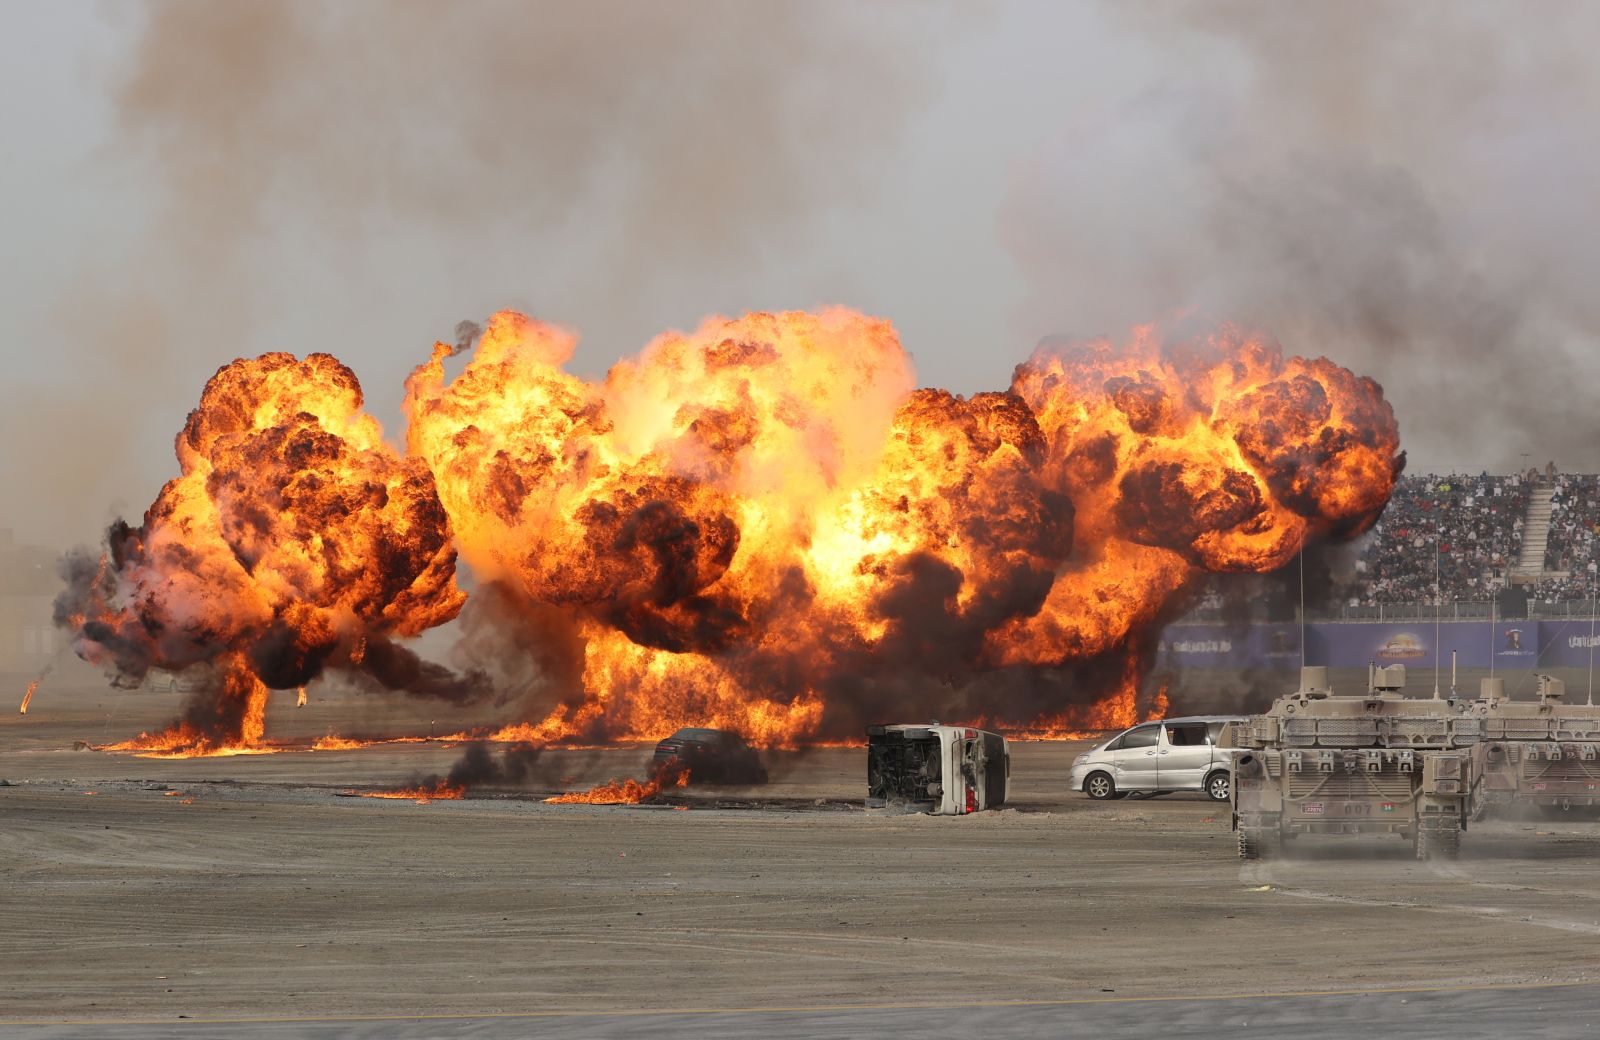 epa09805579 Fires during a military exercise show 'Union Fortress 8' as part of EXPO 2020 Dubai in Gulf Emirates of Dubai, United Arab Emirates, 06 March 2022.  EPA/ALI HAIDER